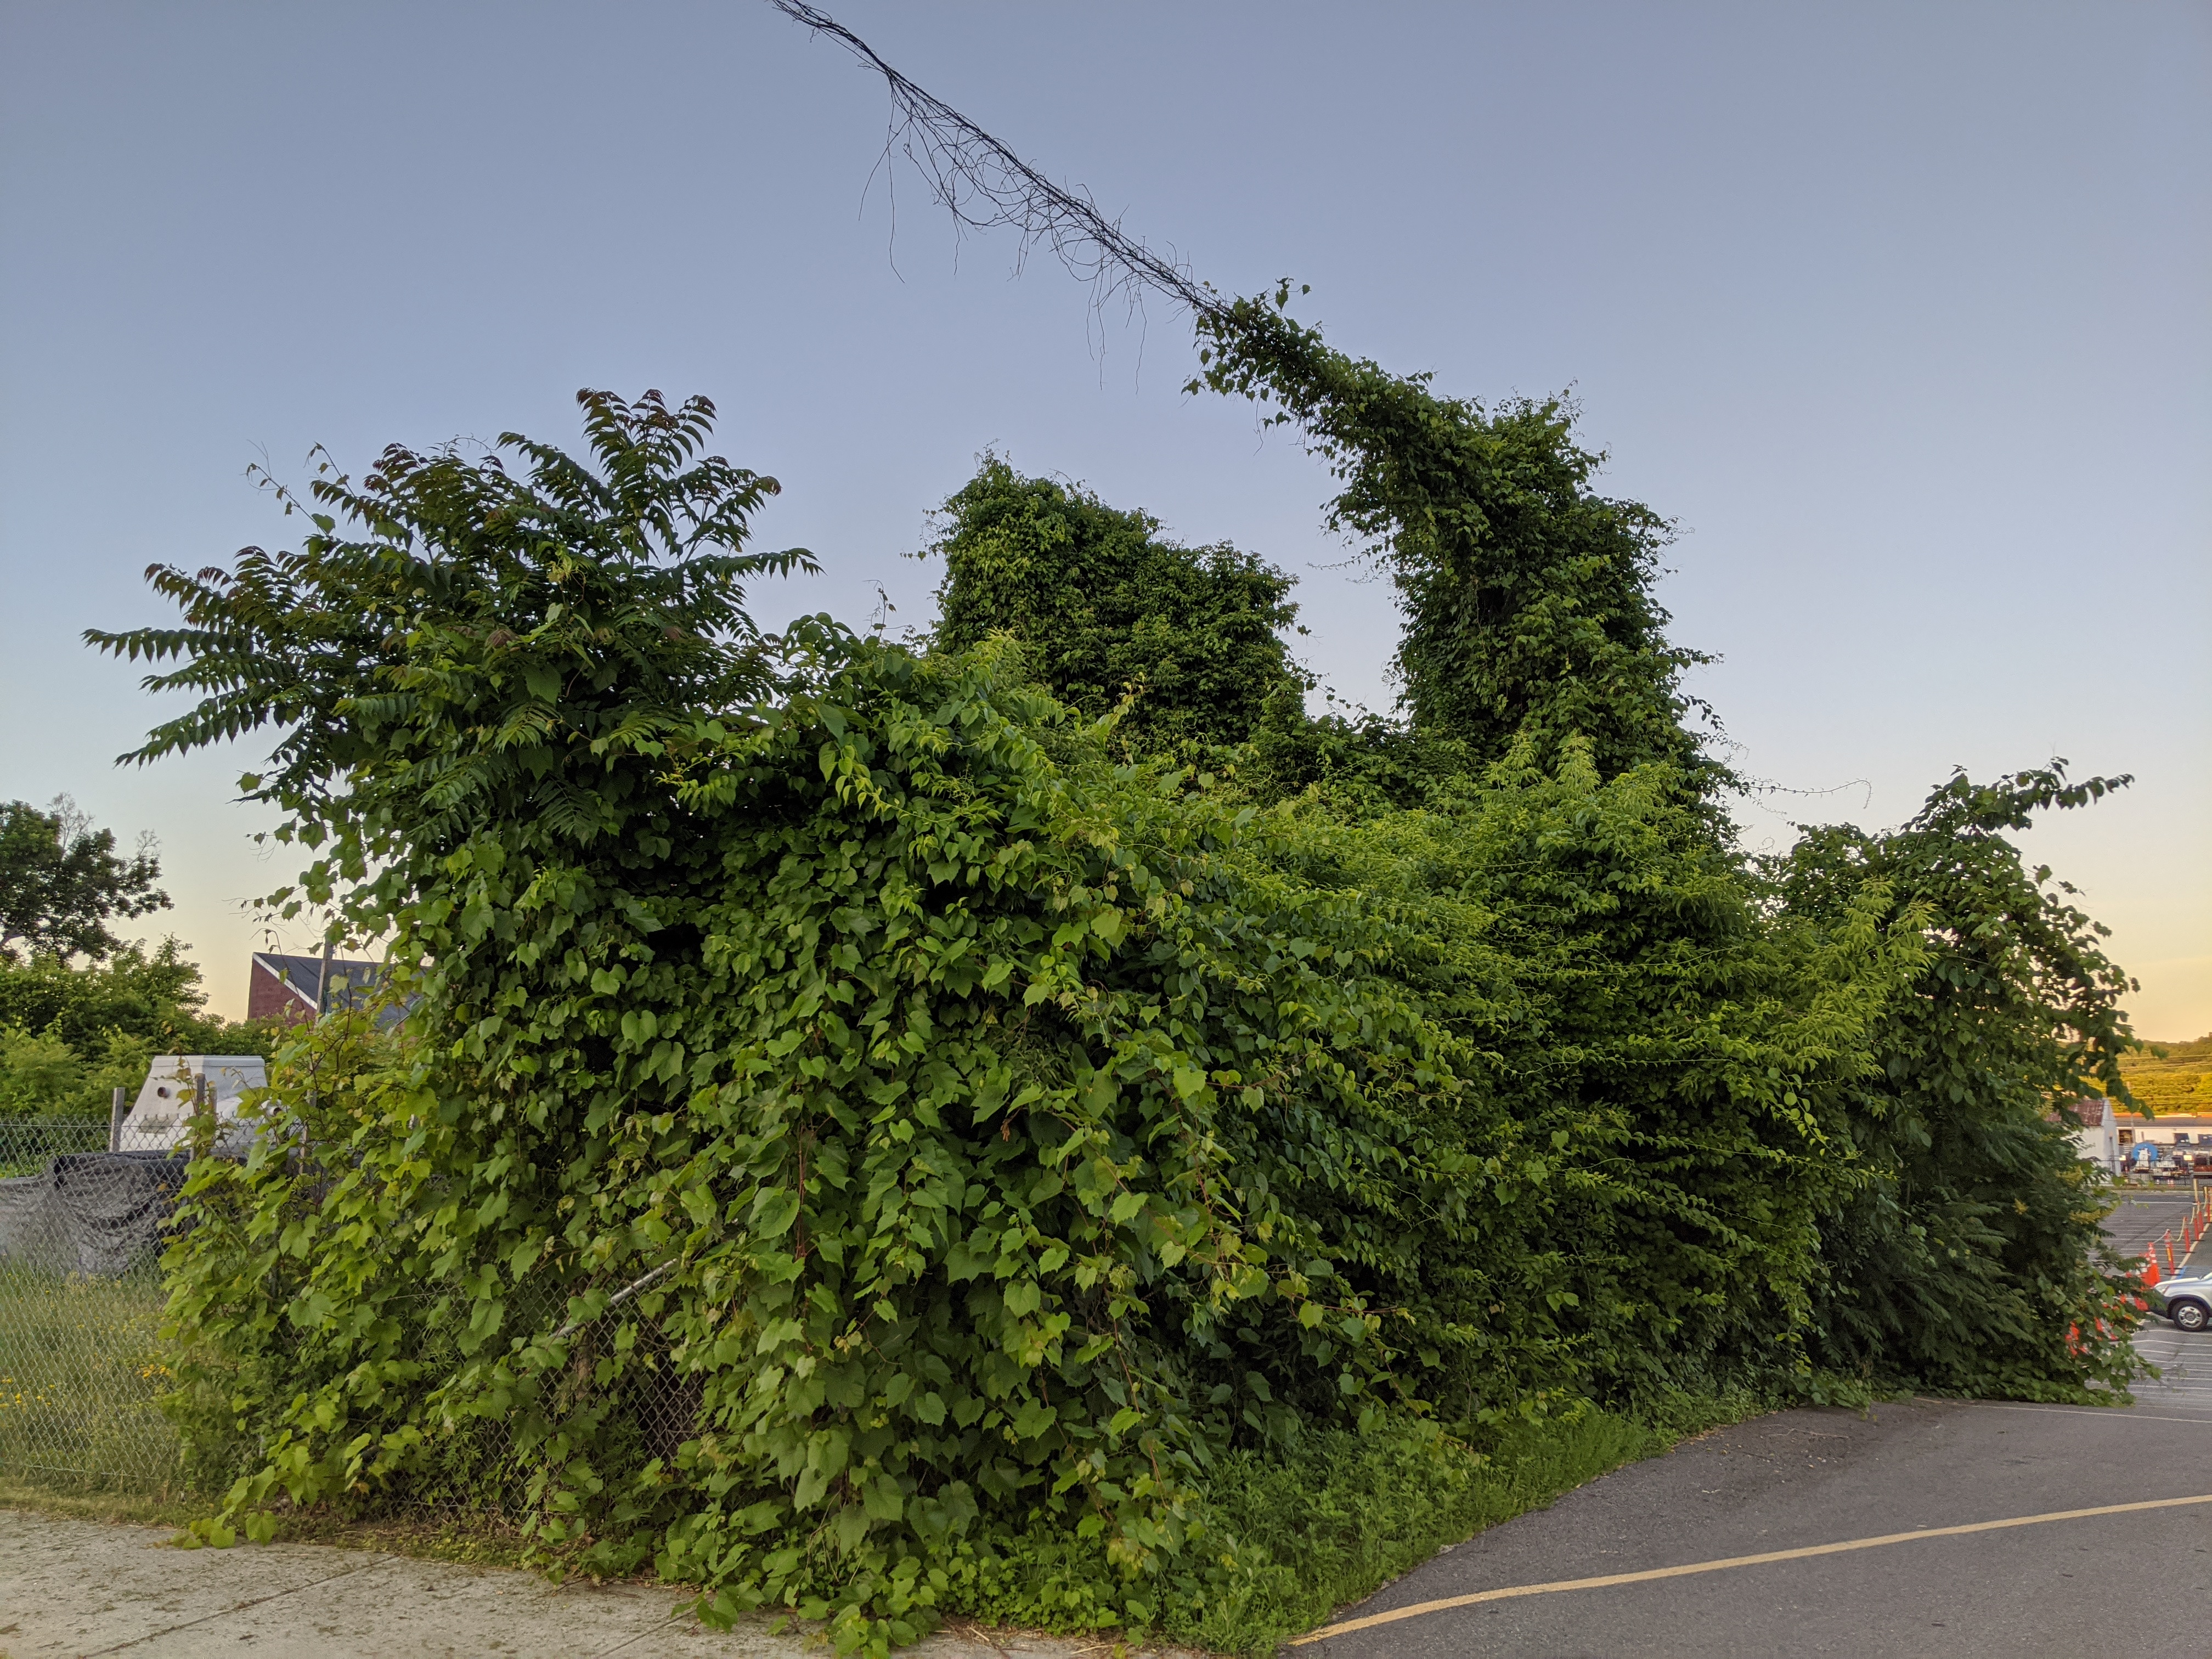 Vines growing over a power/telephone line